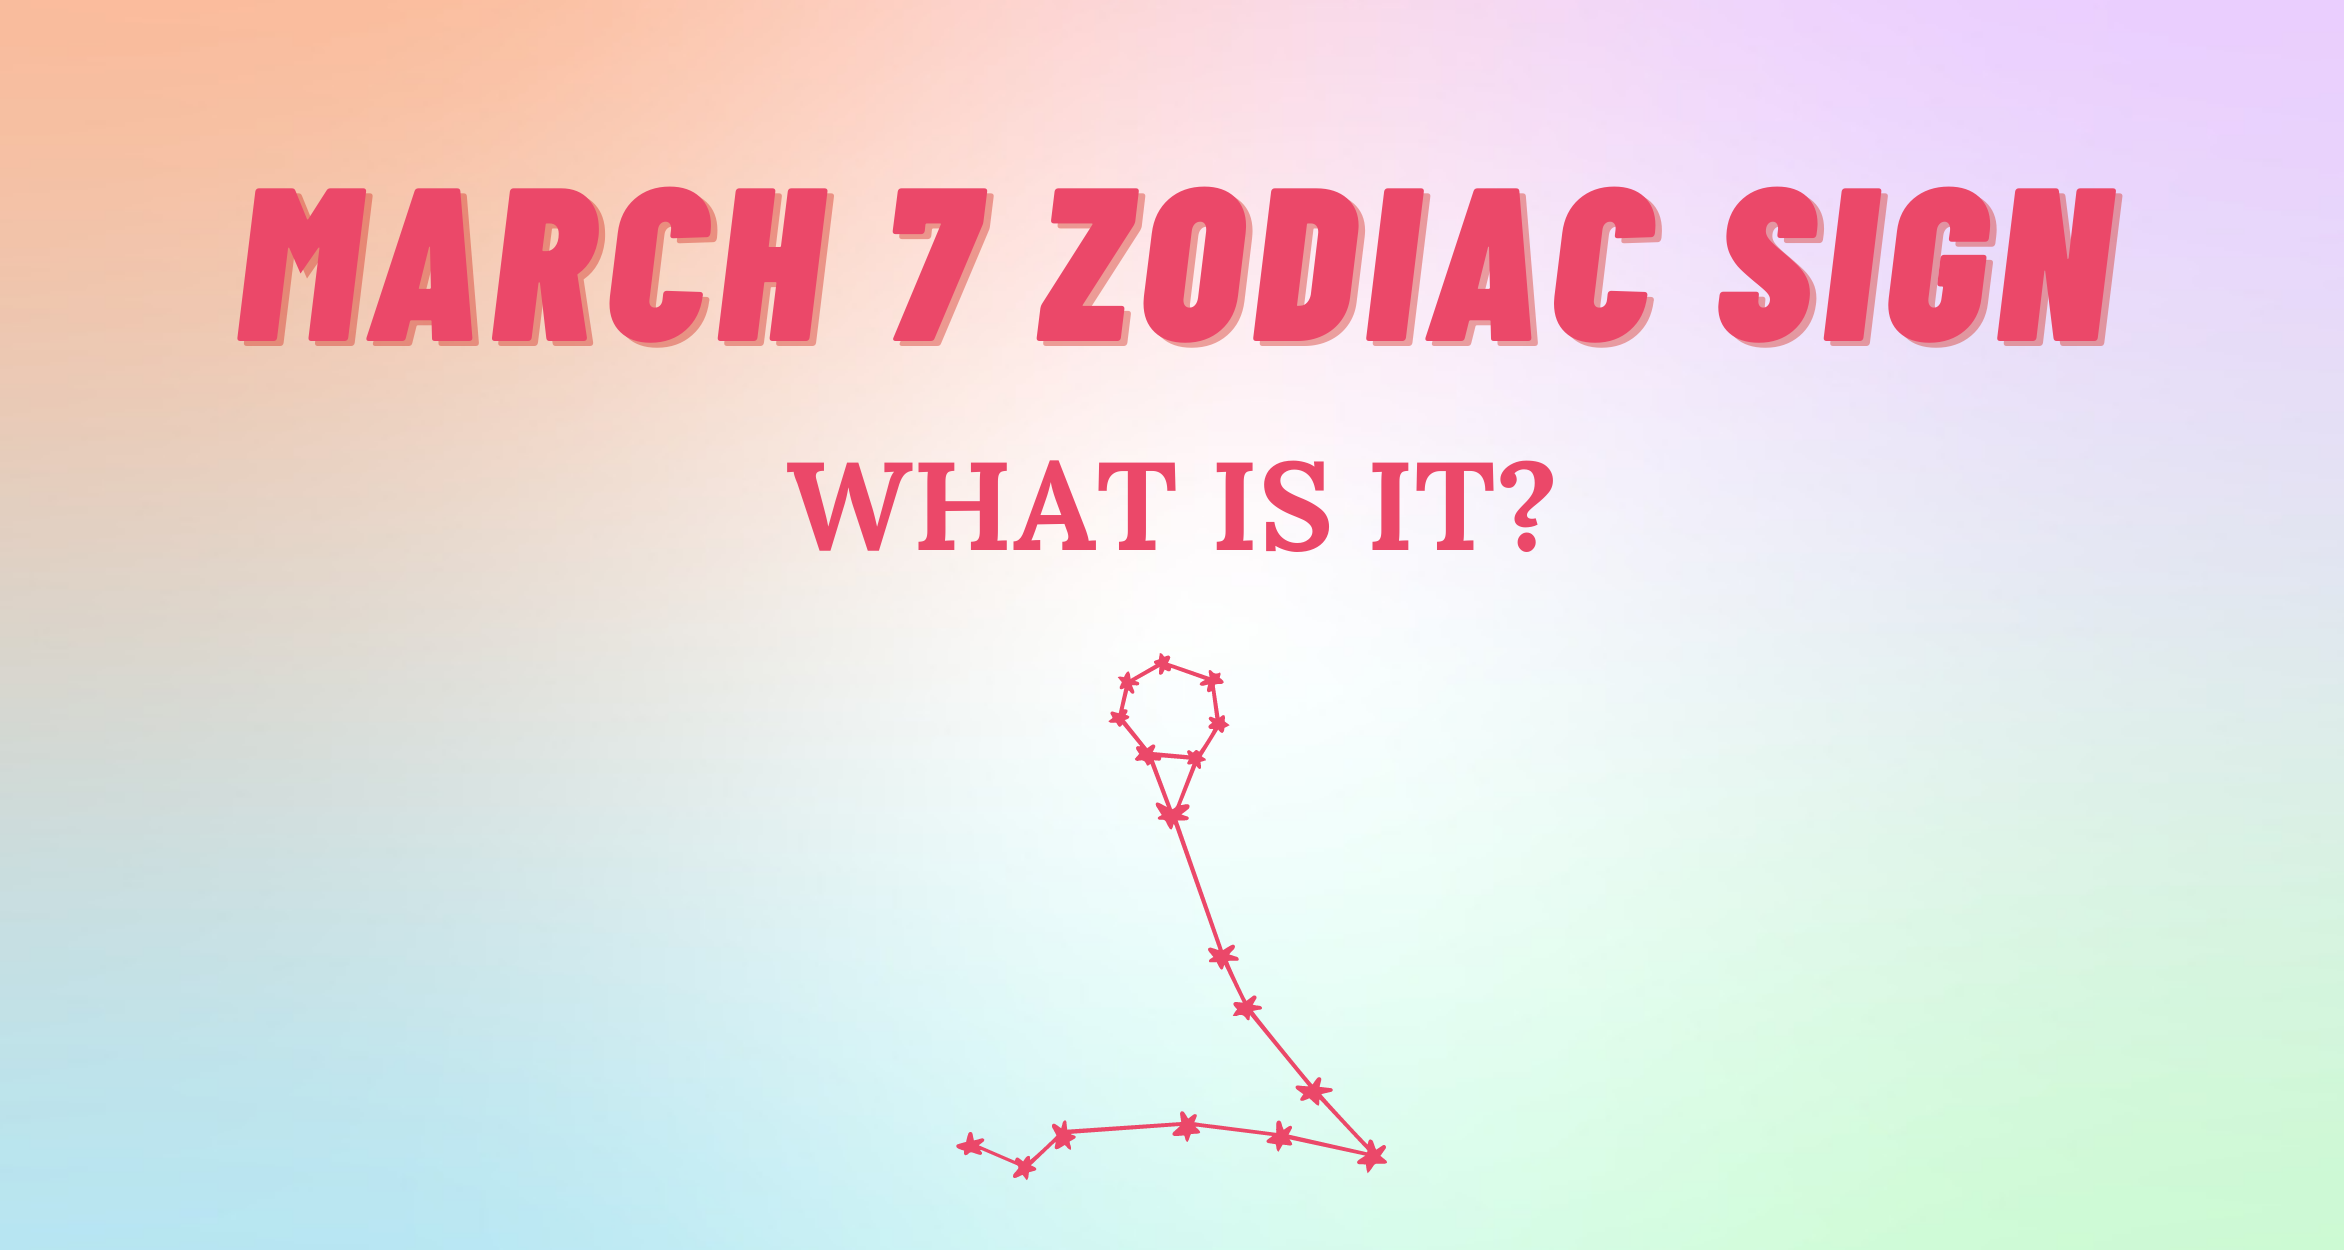 March 7 Zodiac Sign Explained | So Syncd